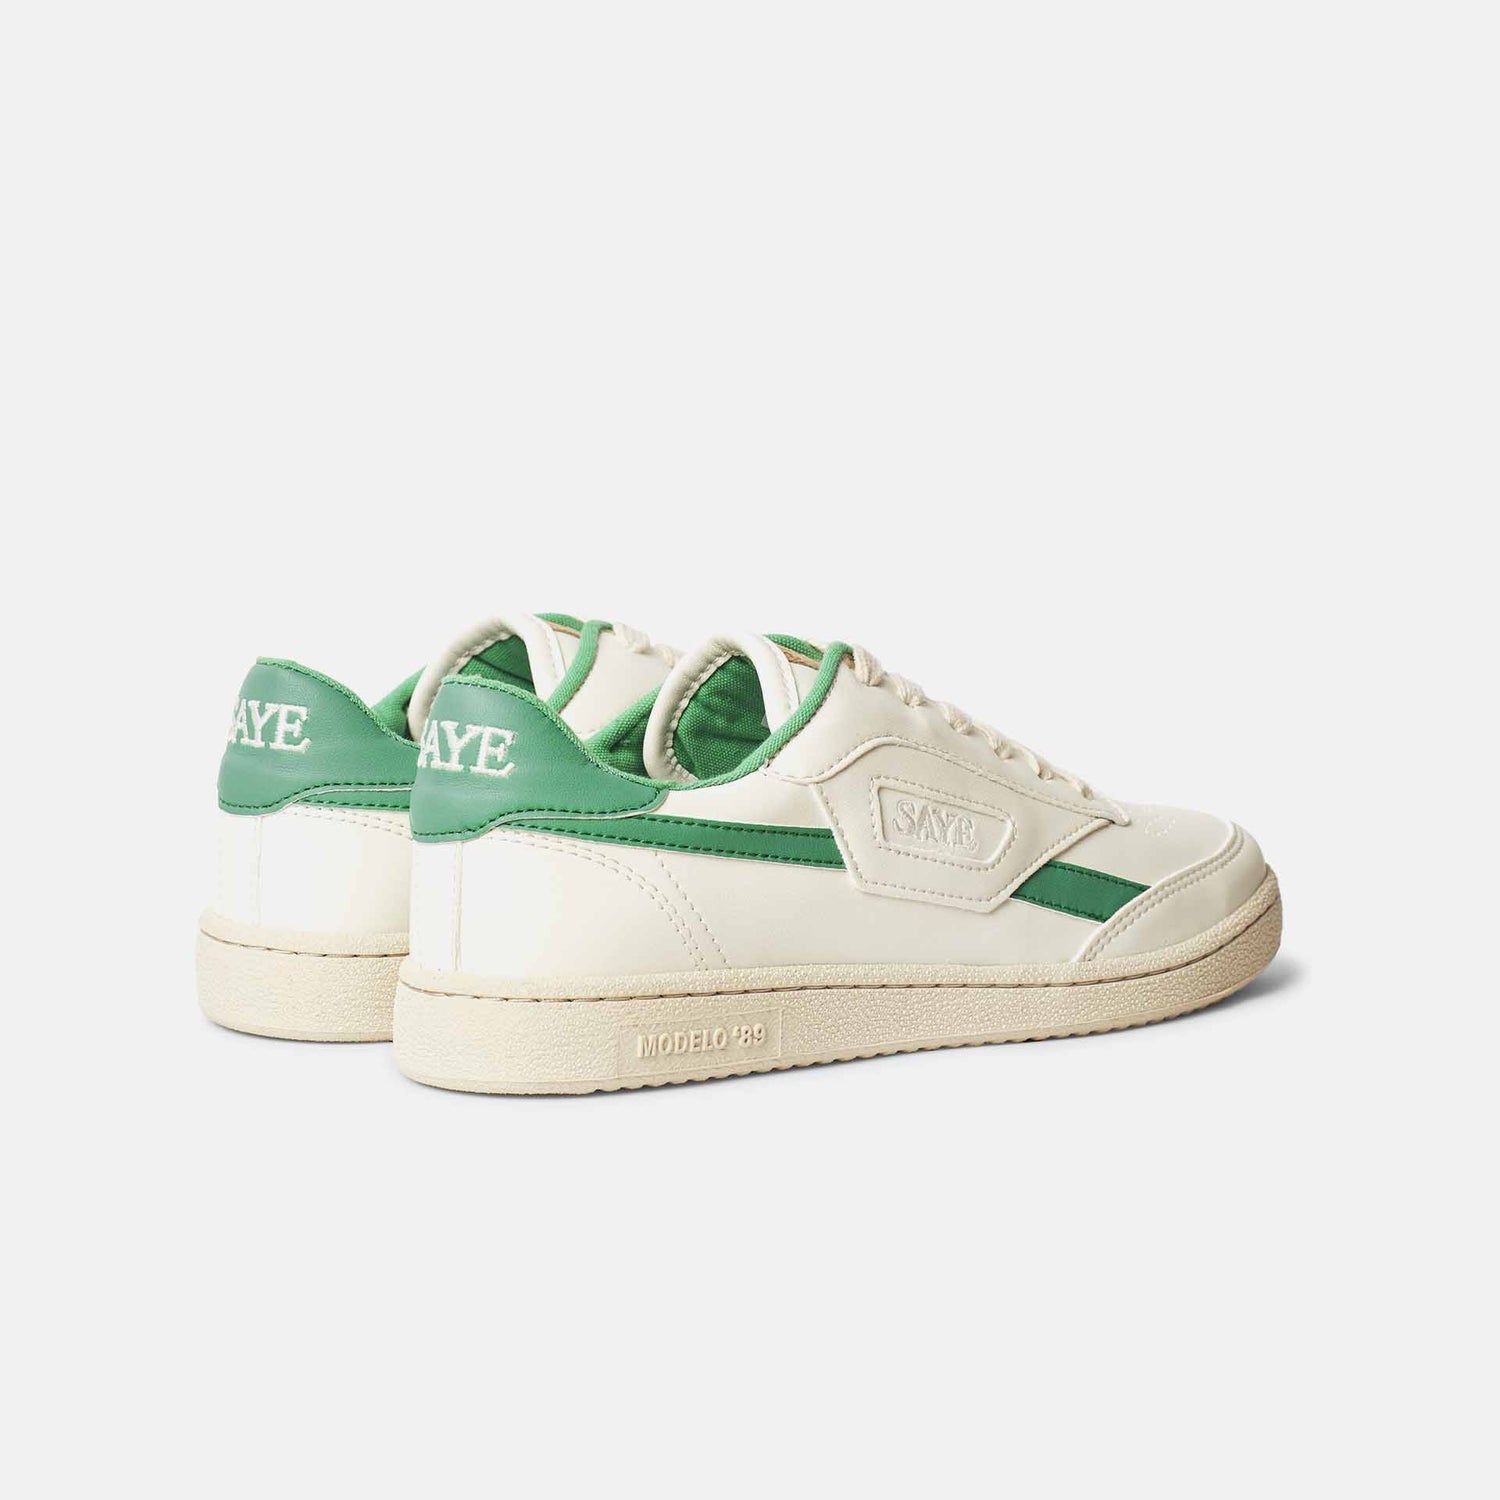 A pair of SAYE Modelo '89 Sneakers - Green that are made with vegan Napa materials.